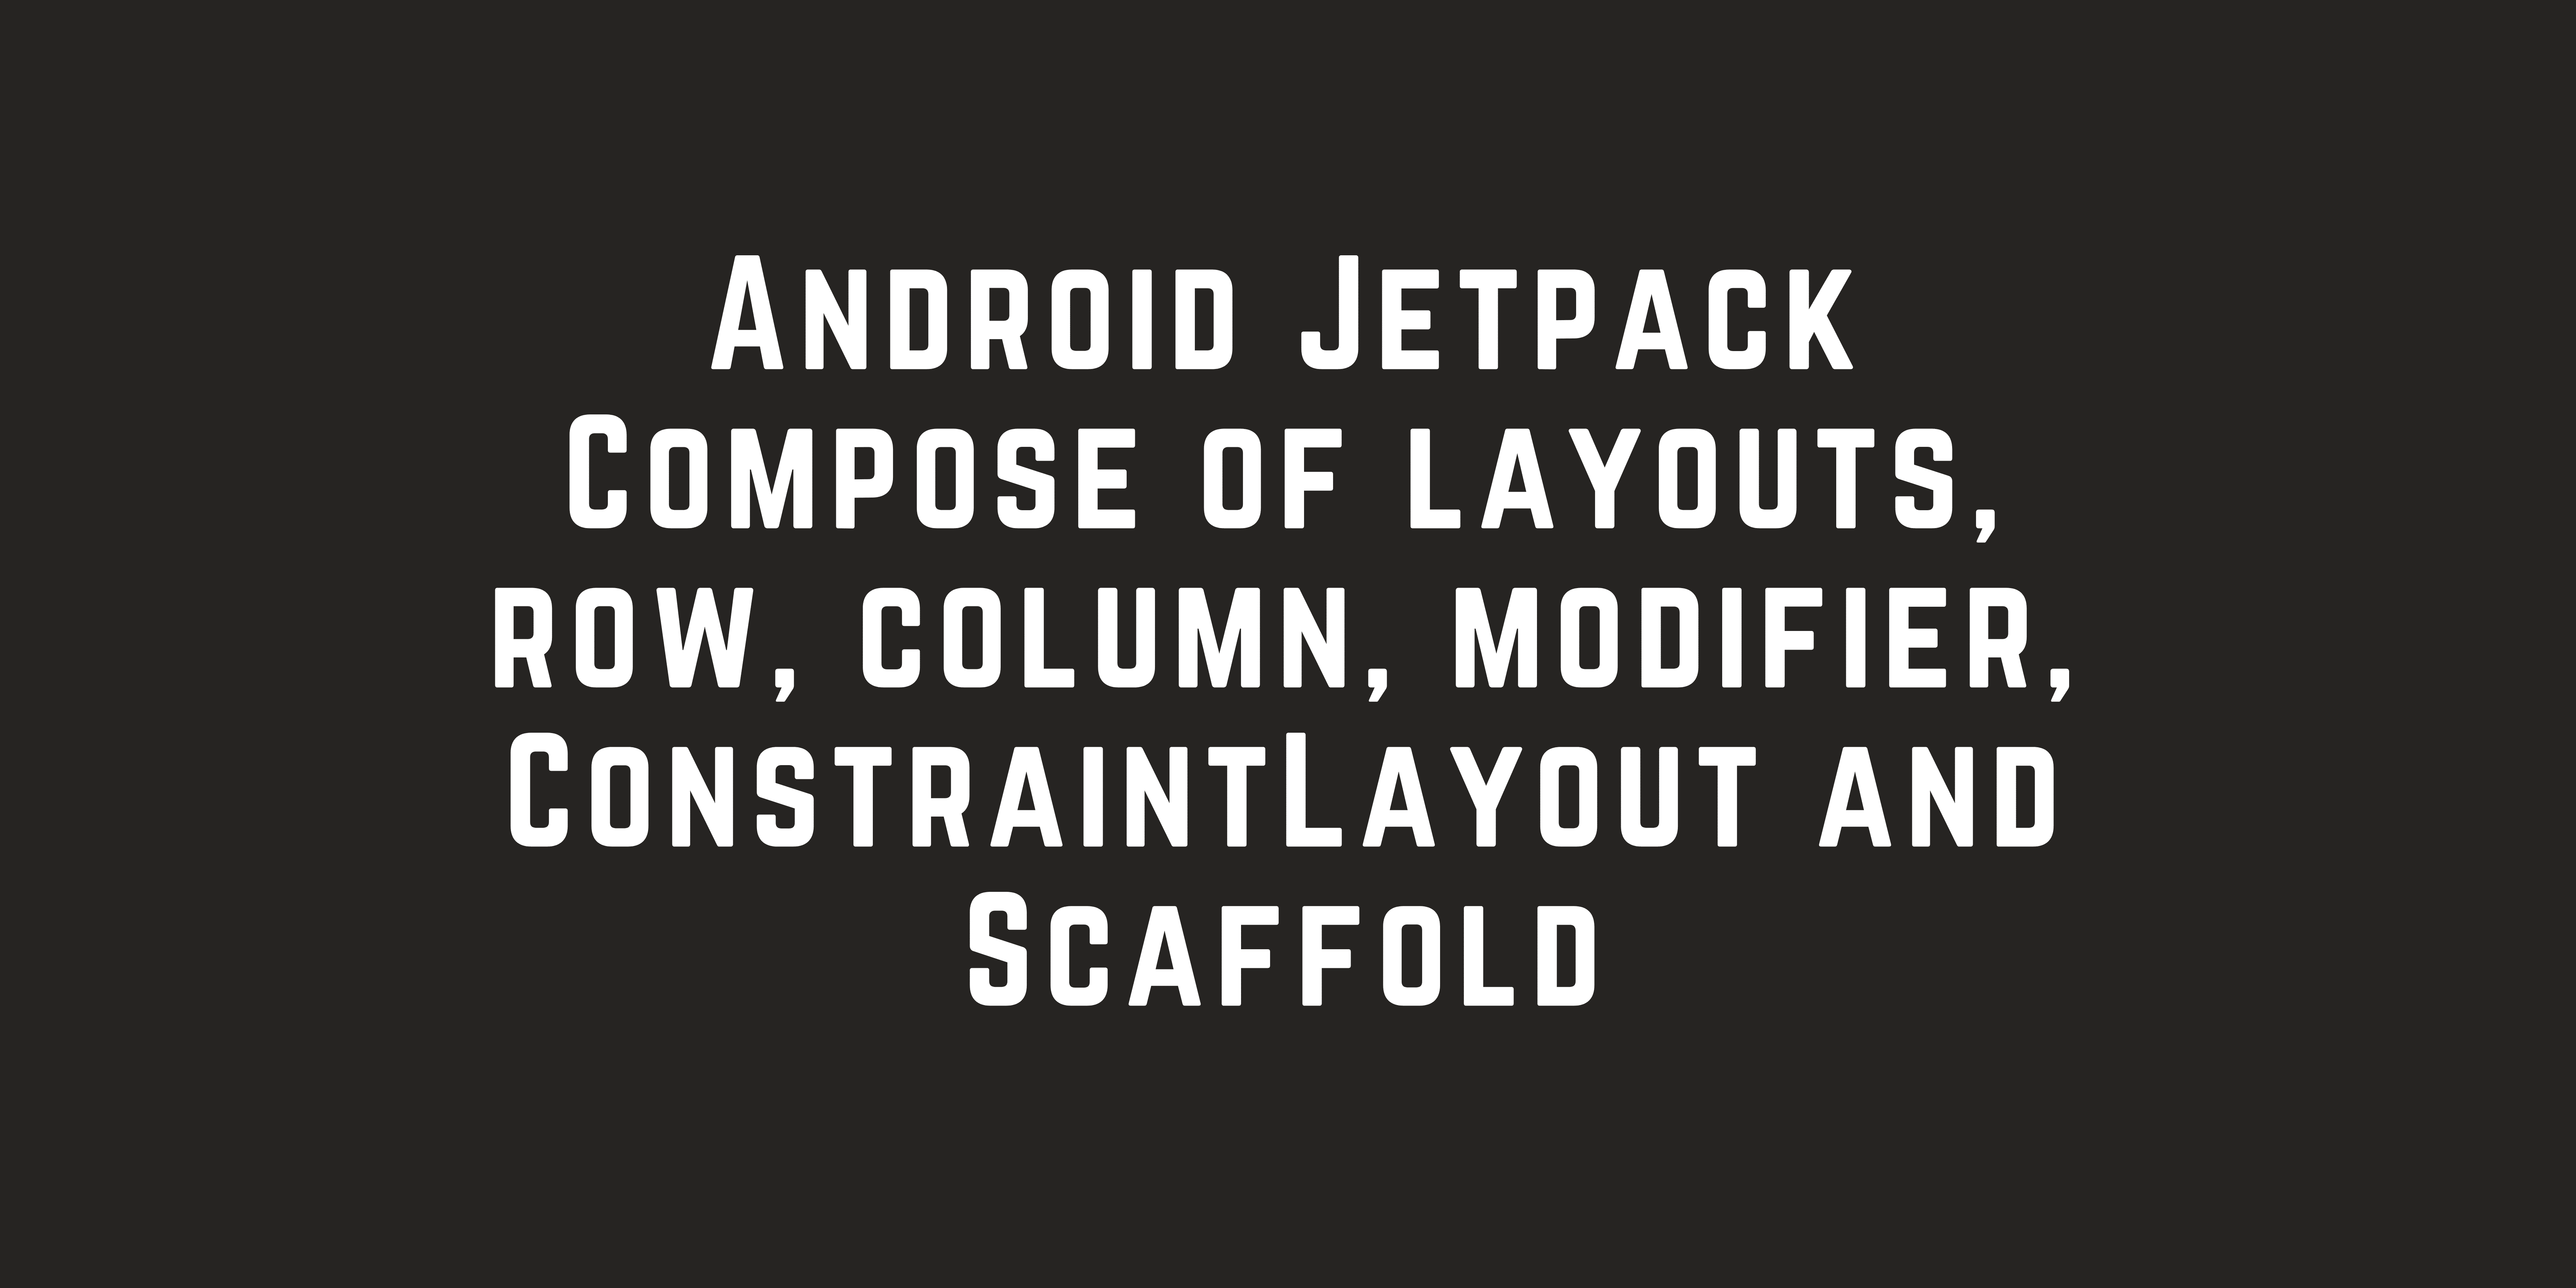 Android Jetpack Compose of layouts, row, column, modifier, ConstraintLayout and Scaffold